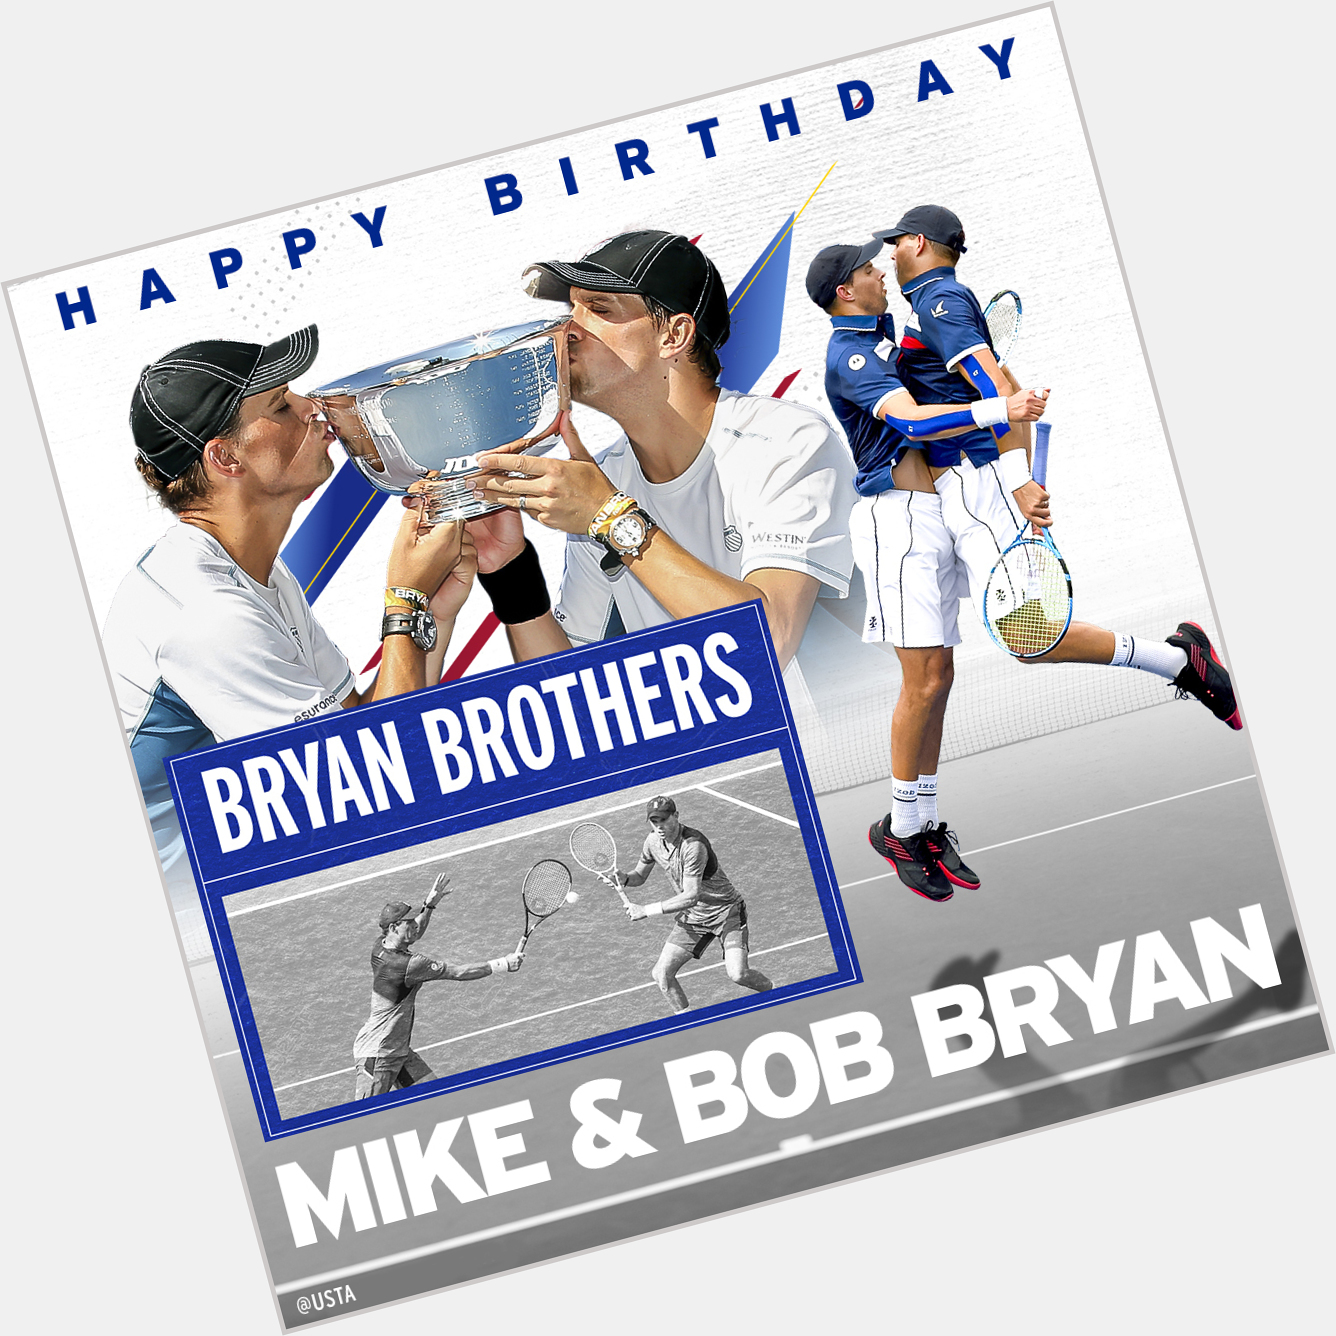 Usta: Double the celebration  Happy Birthday to the legends, Mike & Bob Bryan! 